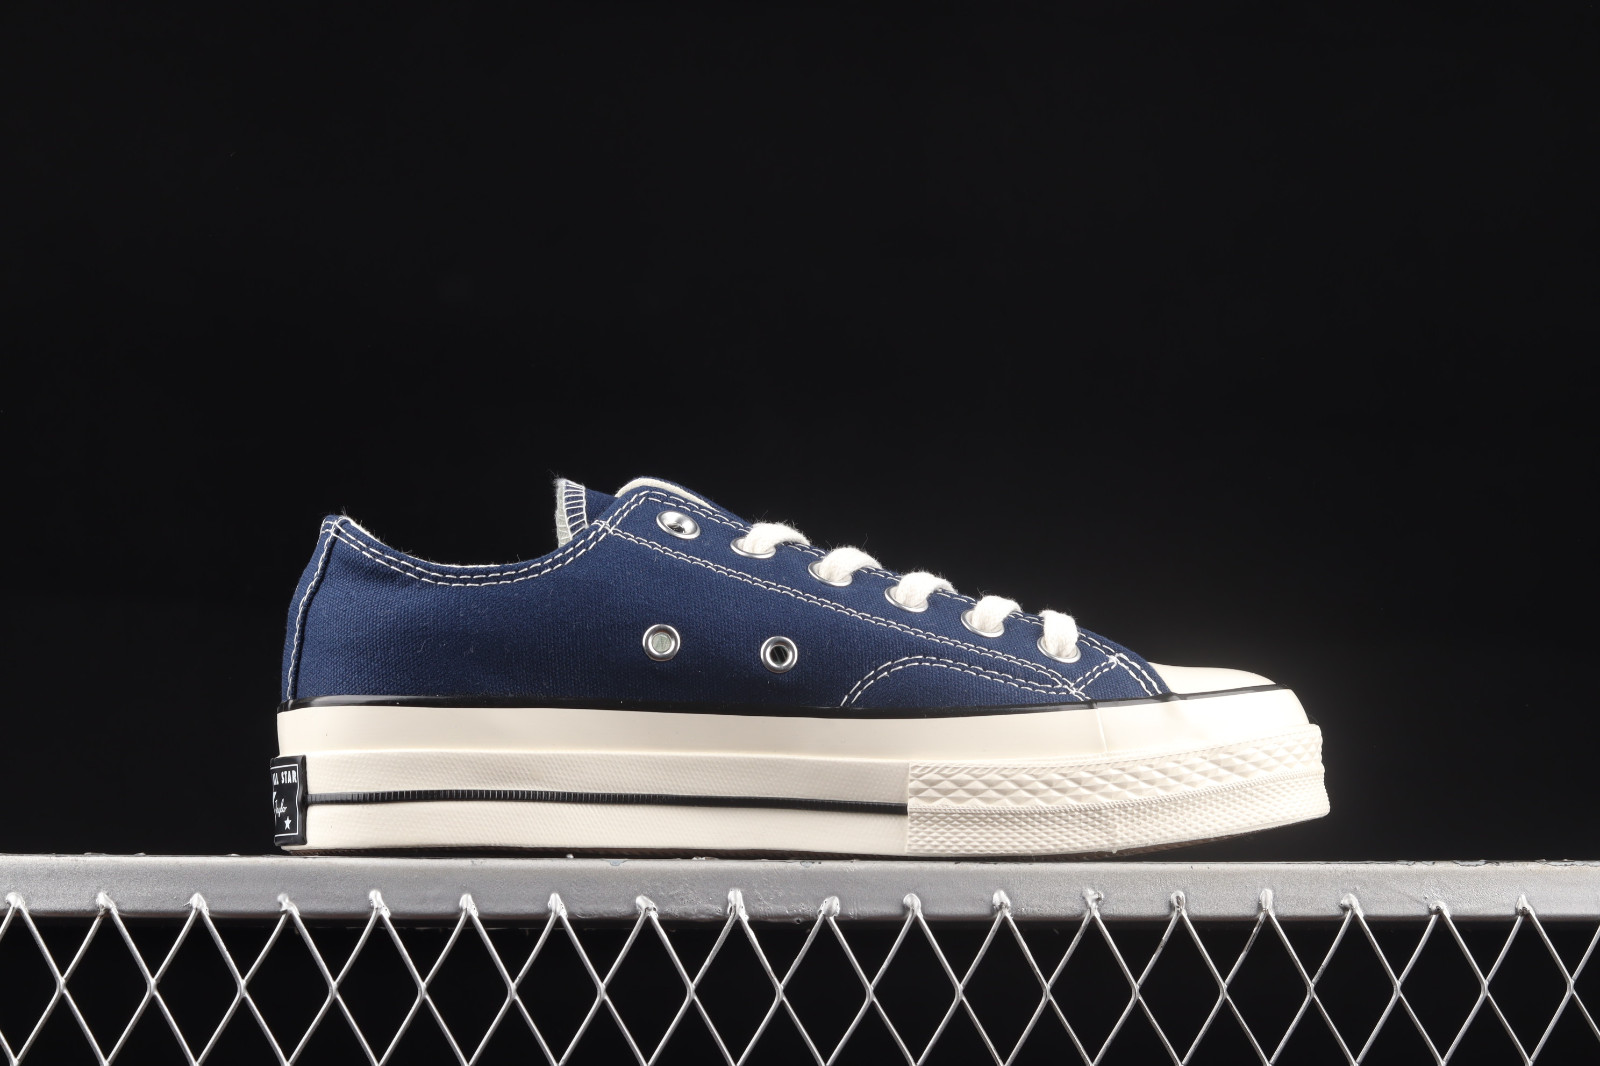 Converse Chuck Taylor All Star 70 Low Navy Blue Black 172679C - RvceShops